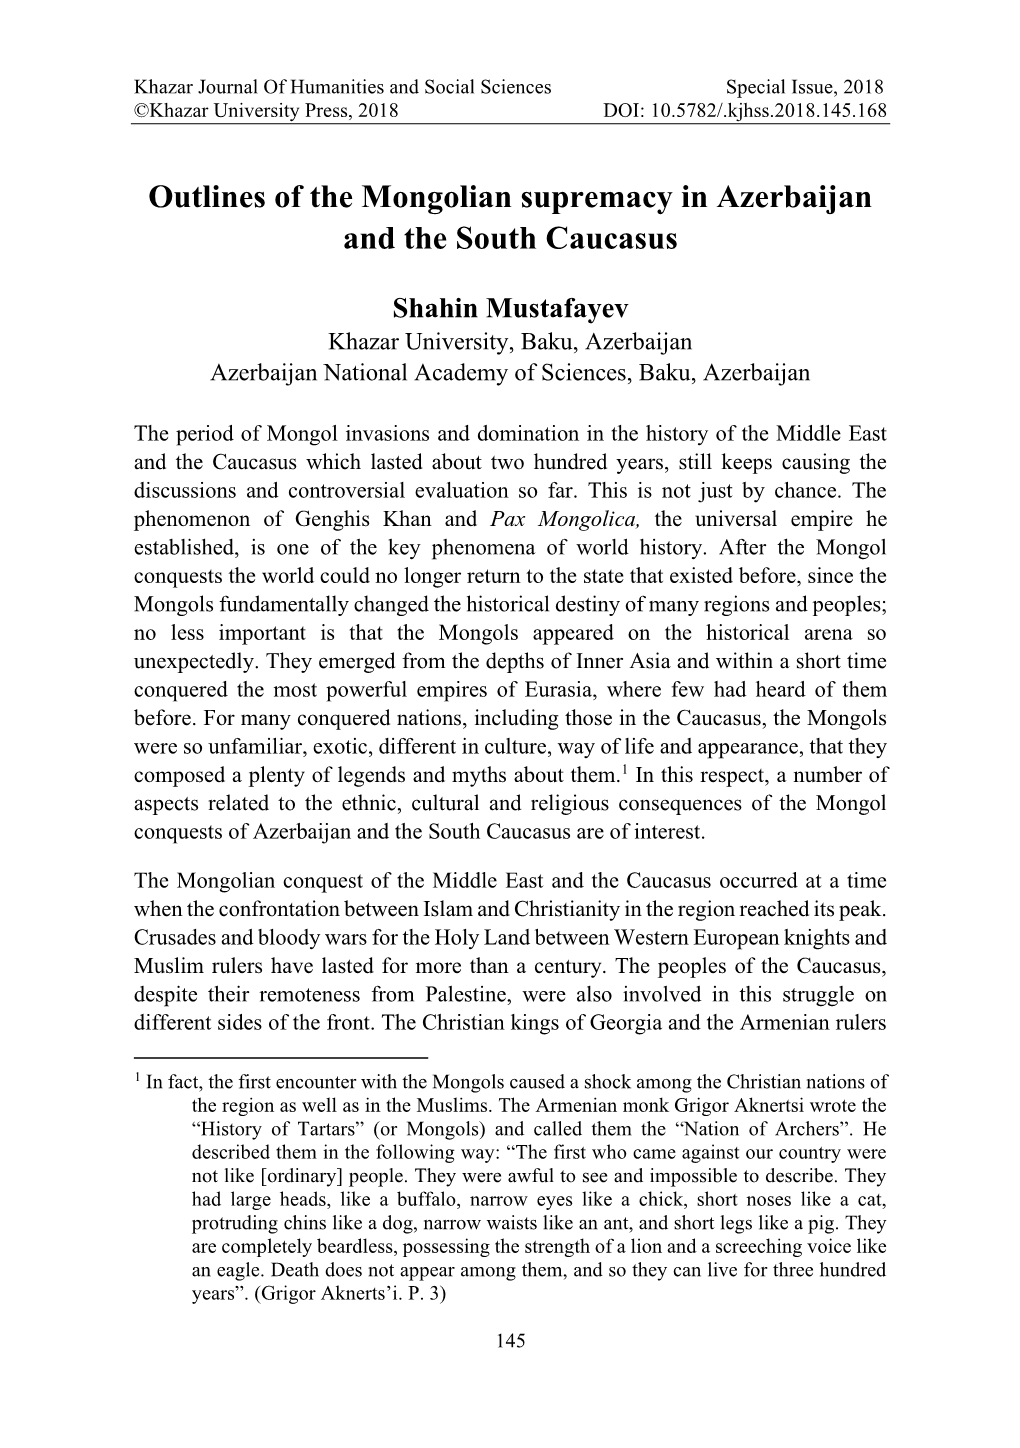 Outlines of the Mongolian Supremacy in Azerbaijan and the South Caucasus